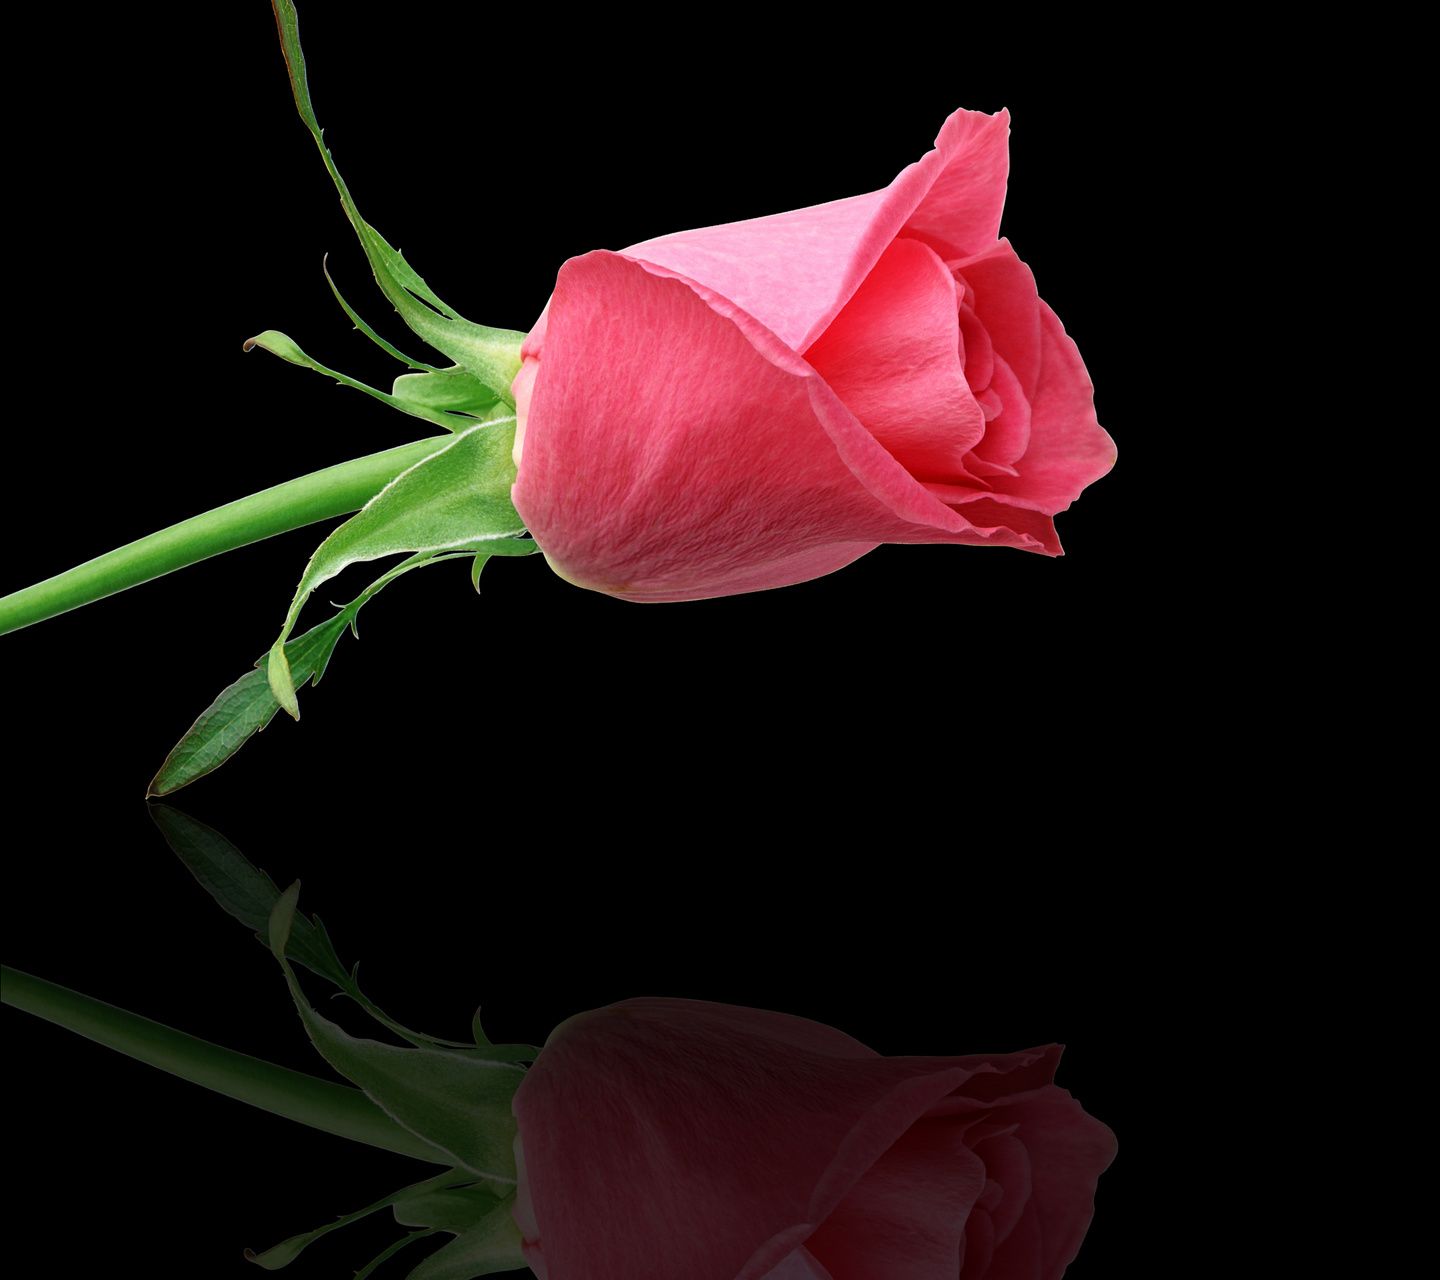 Best Rose Wallpapers For Mobile : Rose Phone Hd Wallpapers Wallpaper